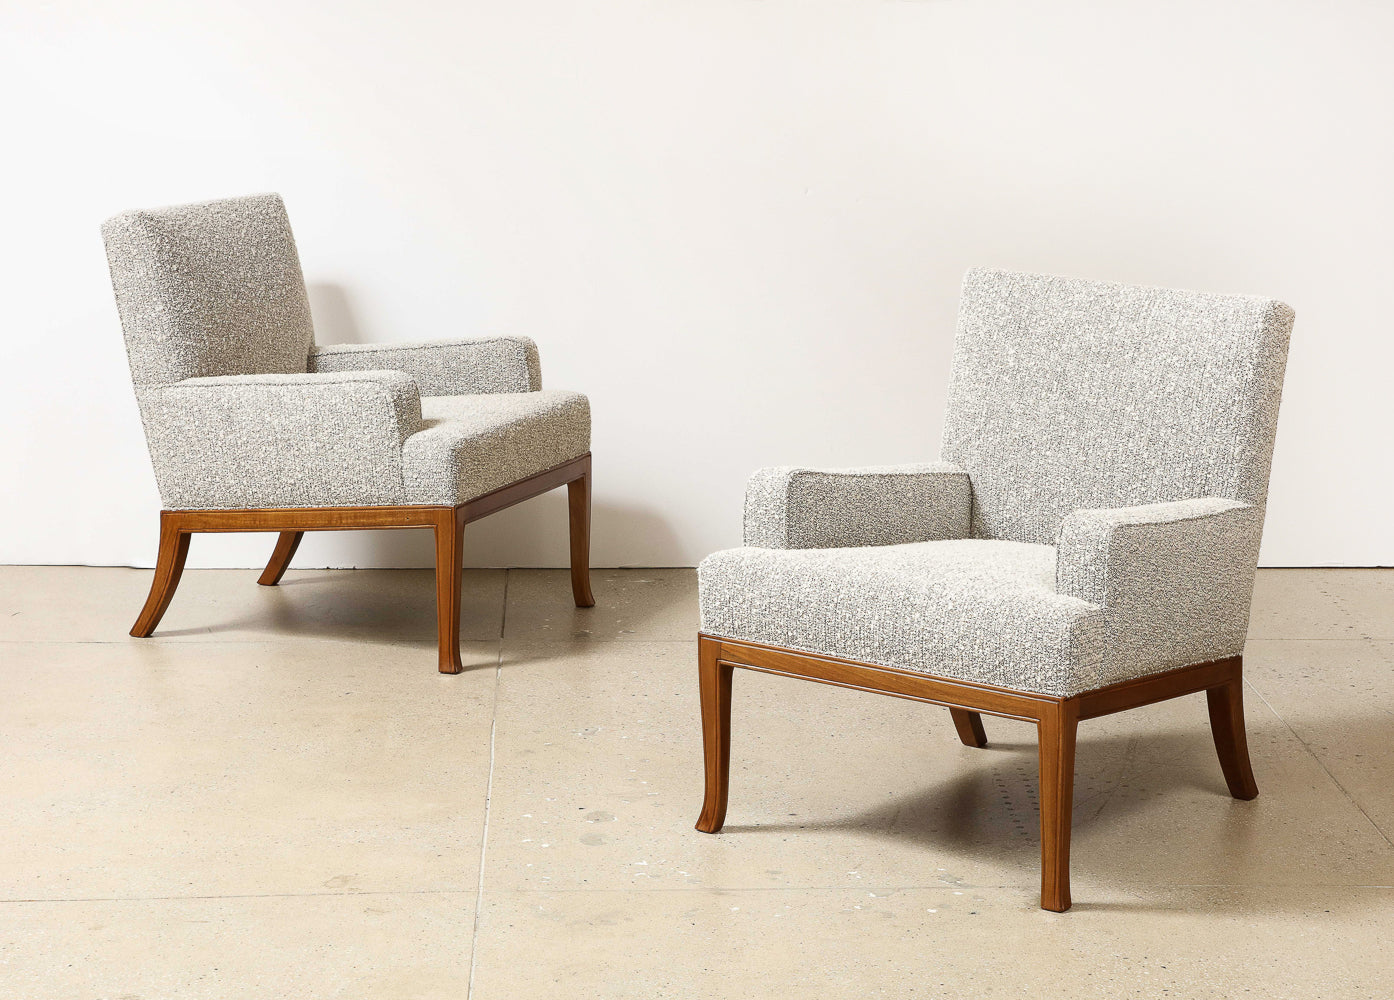 No. 102 Lounge Chairs by T. H. Robsjohn-Gibbings for Saridis